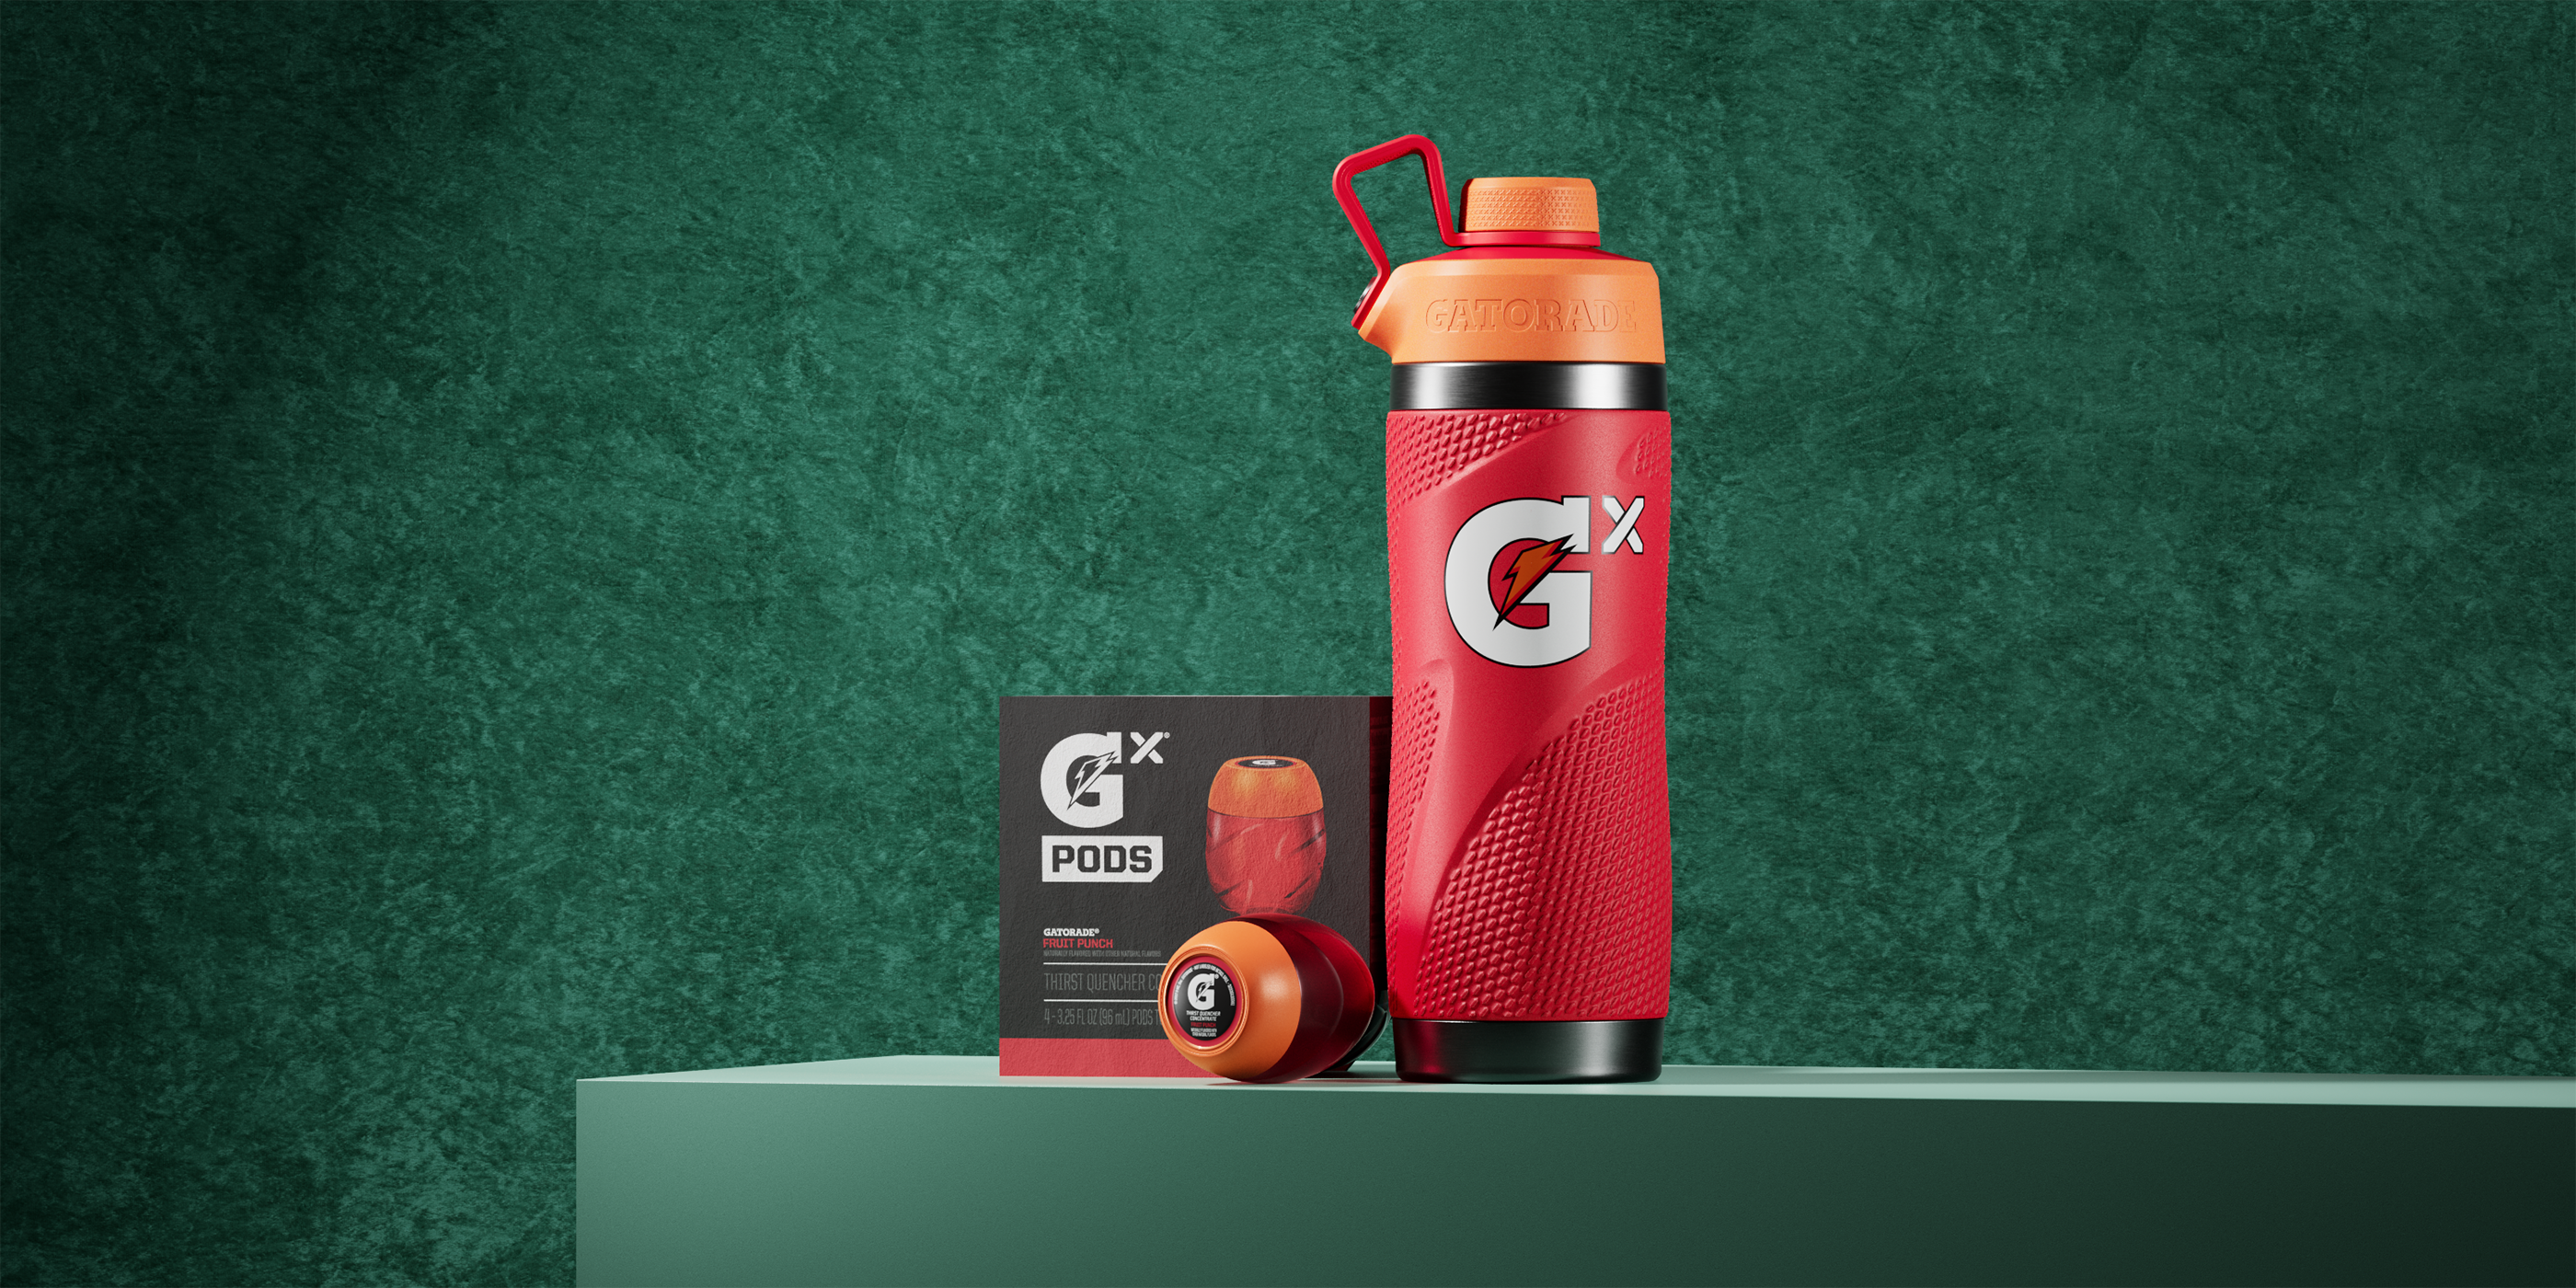 Holiday page red gx stainless steel bottle and pods